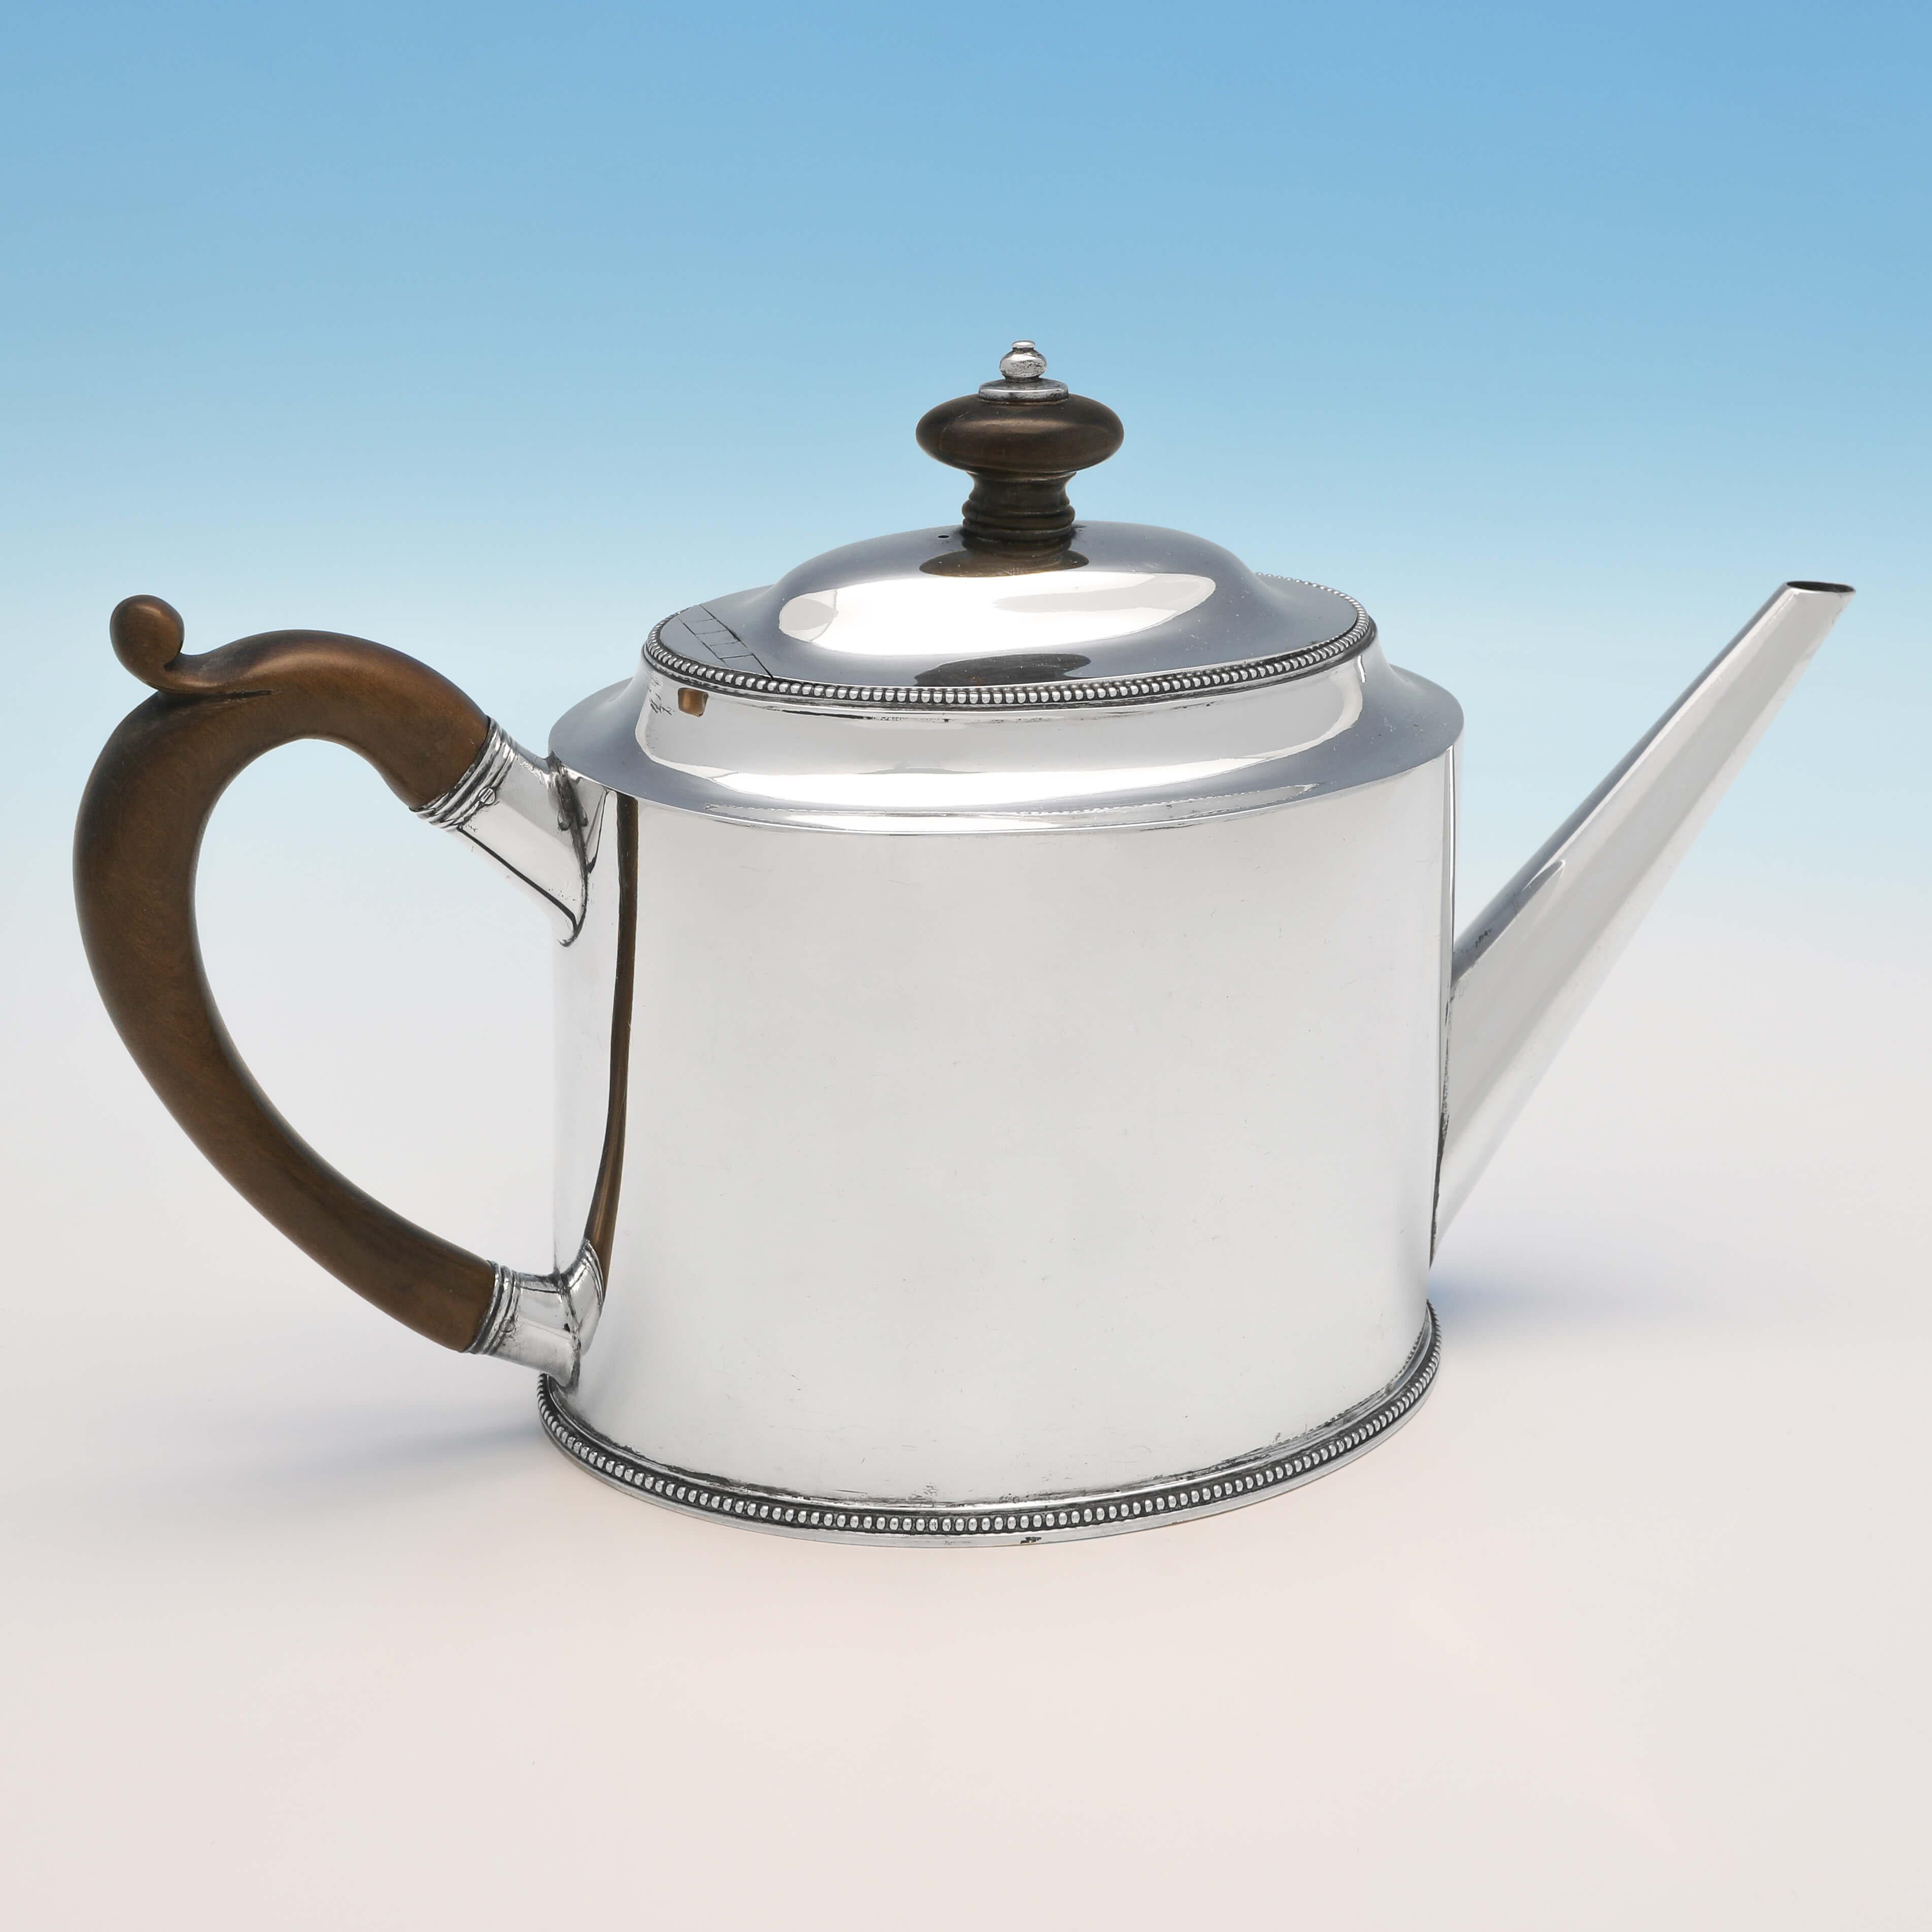 Hallmarked in London in 1785 by Hester Bateman, this elegant, George III, antique sterling silver teapot and stand, is plain in style, embellished with fine beading, and features a wooden handle and finial. The teapot on stand measures 7